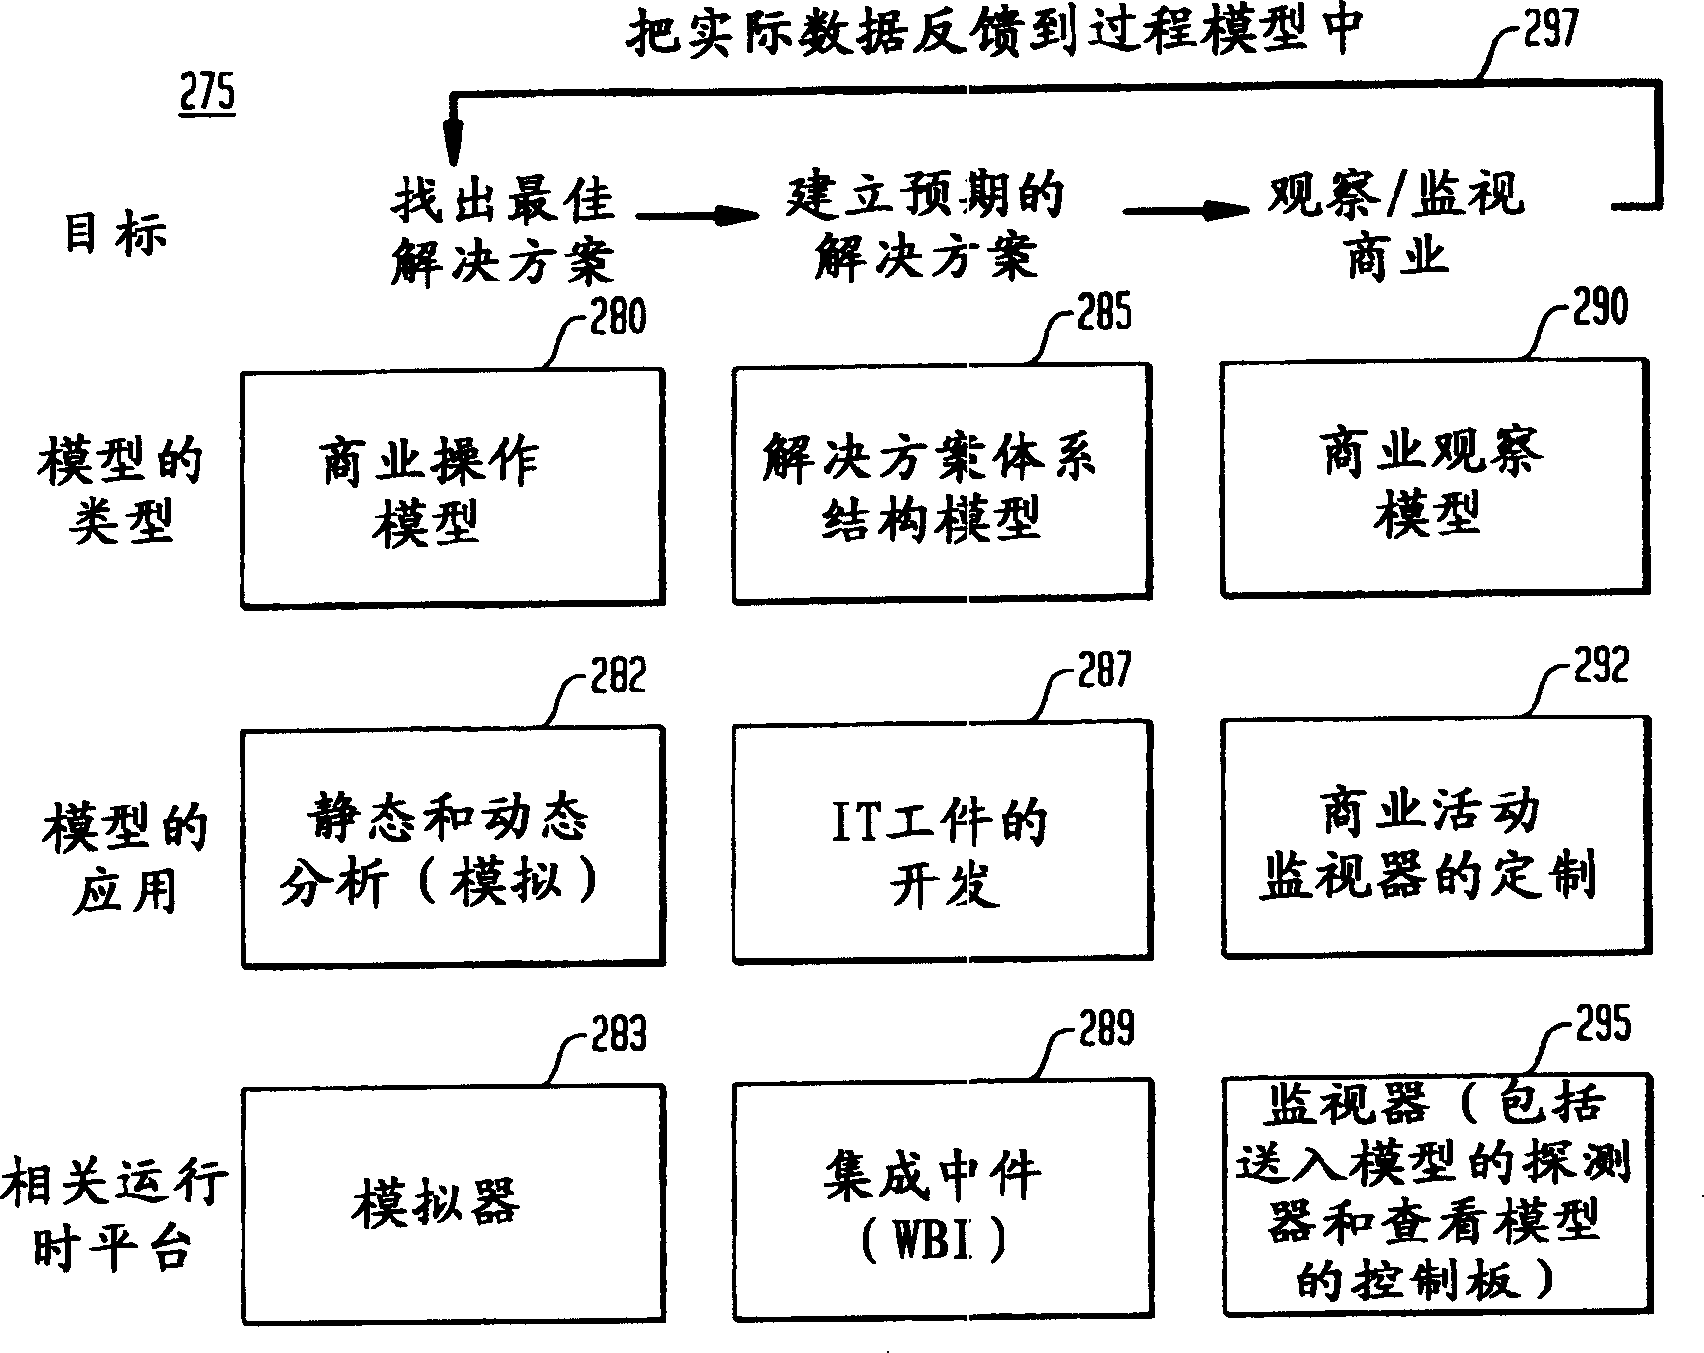 System and method for generation and management of integrated solution in business process